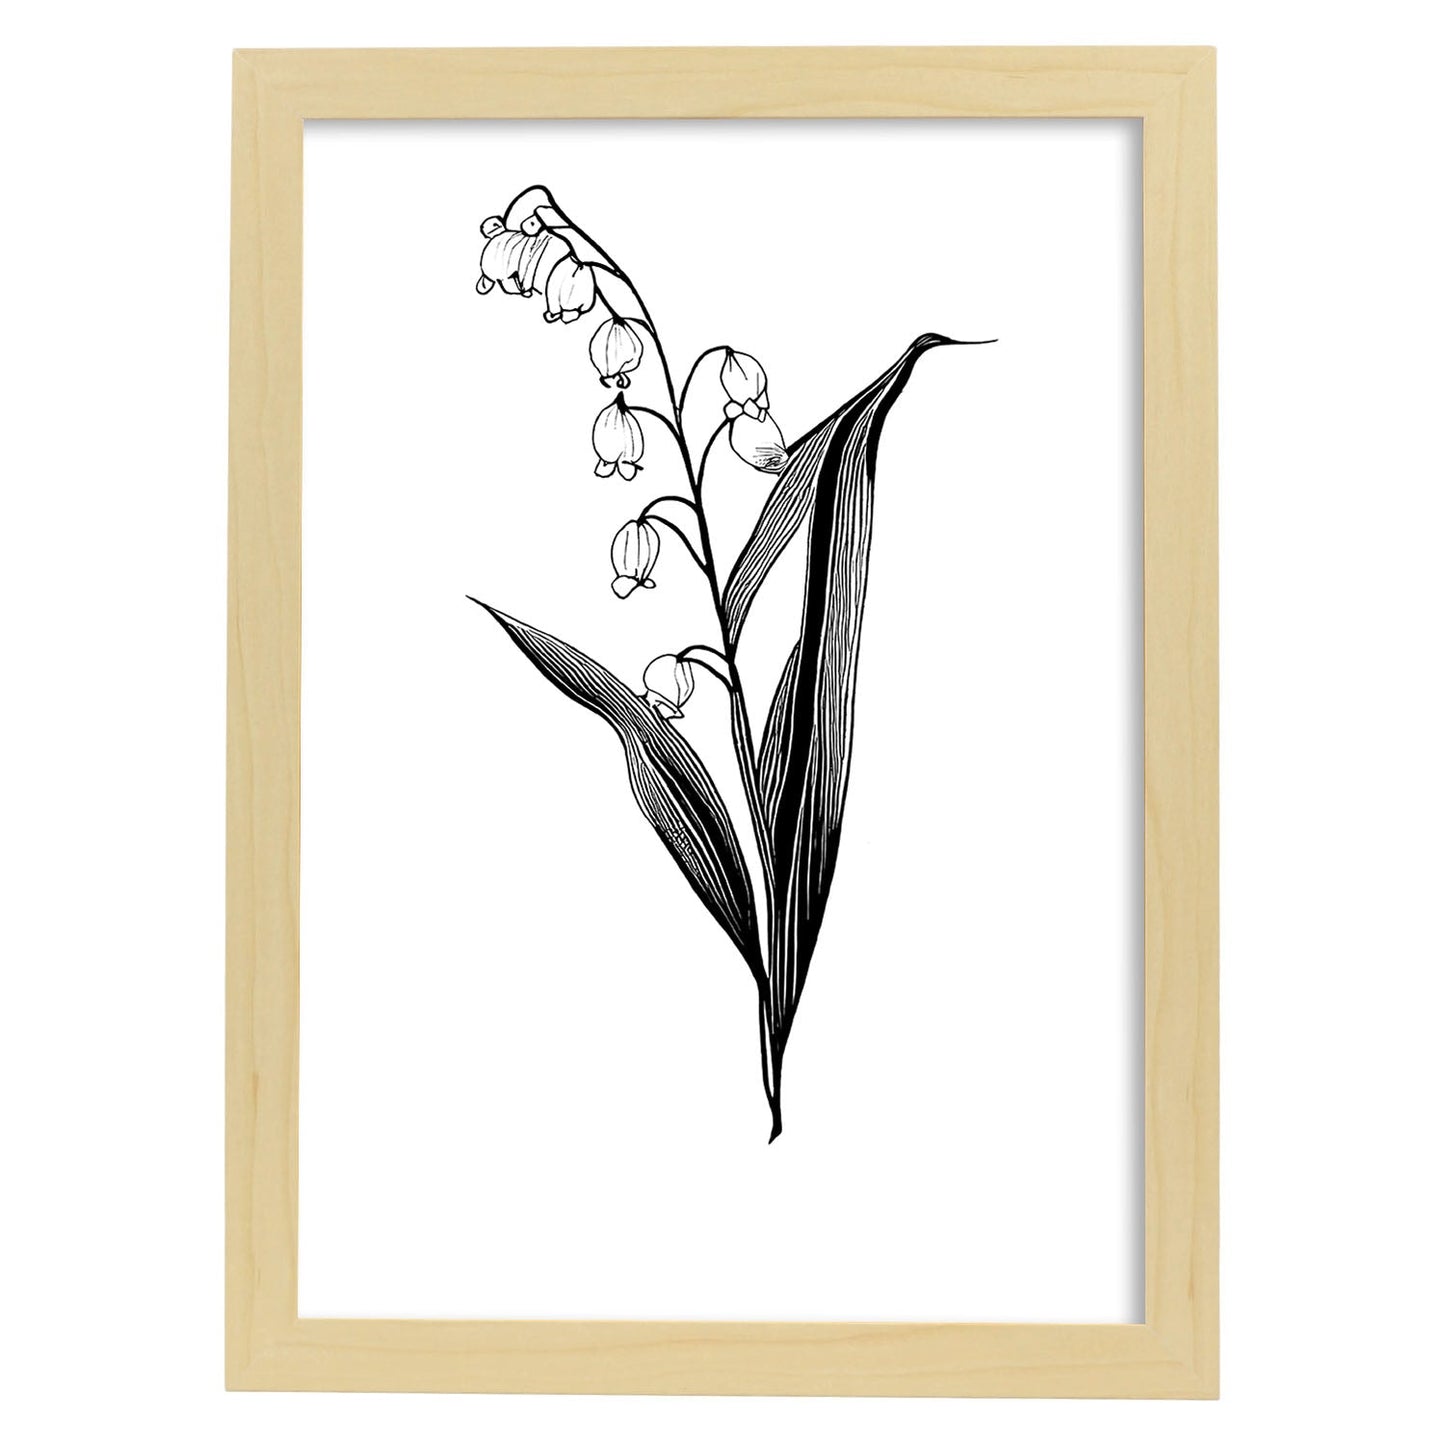 Nacnic Lily of the valley Minimalist Line Art. Aesthetic Wall Art Prints for Bedroom or Living Room Design.